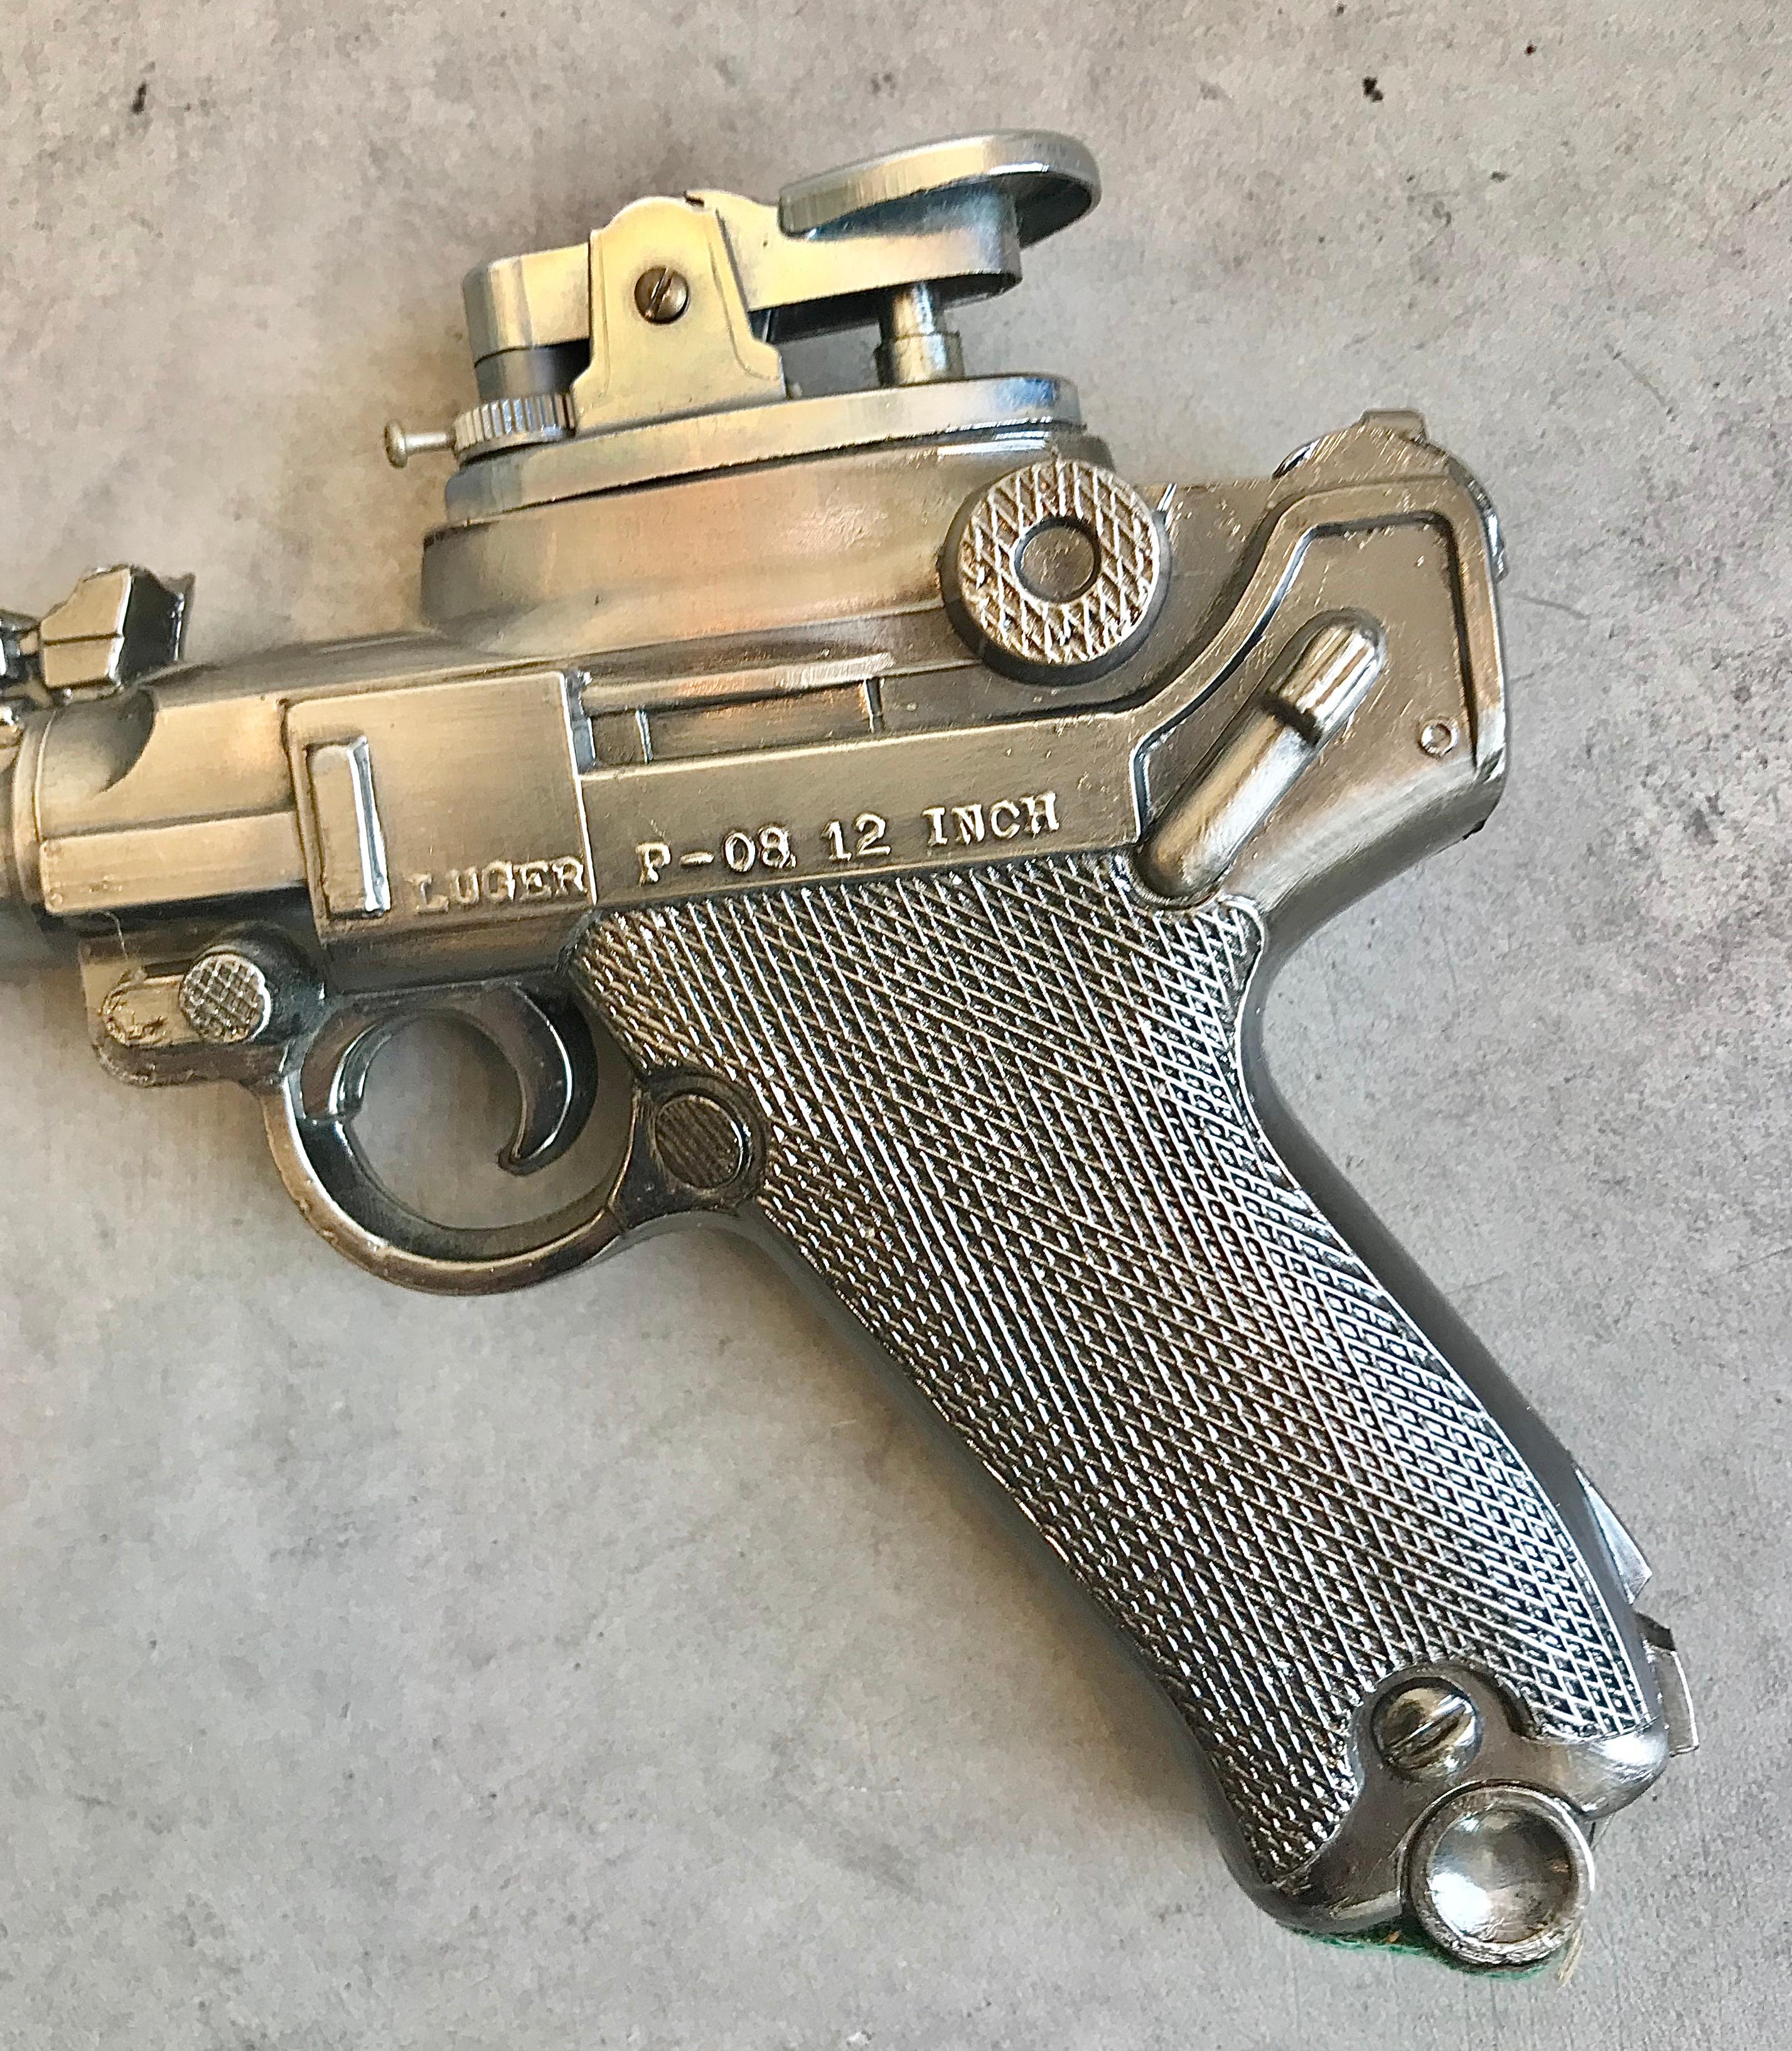 Cool vintage table lighter in the shape of a Luger P-08 12 inch handgun. Made of metal, cool tobacco accessory and conversation piece.

  